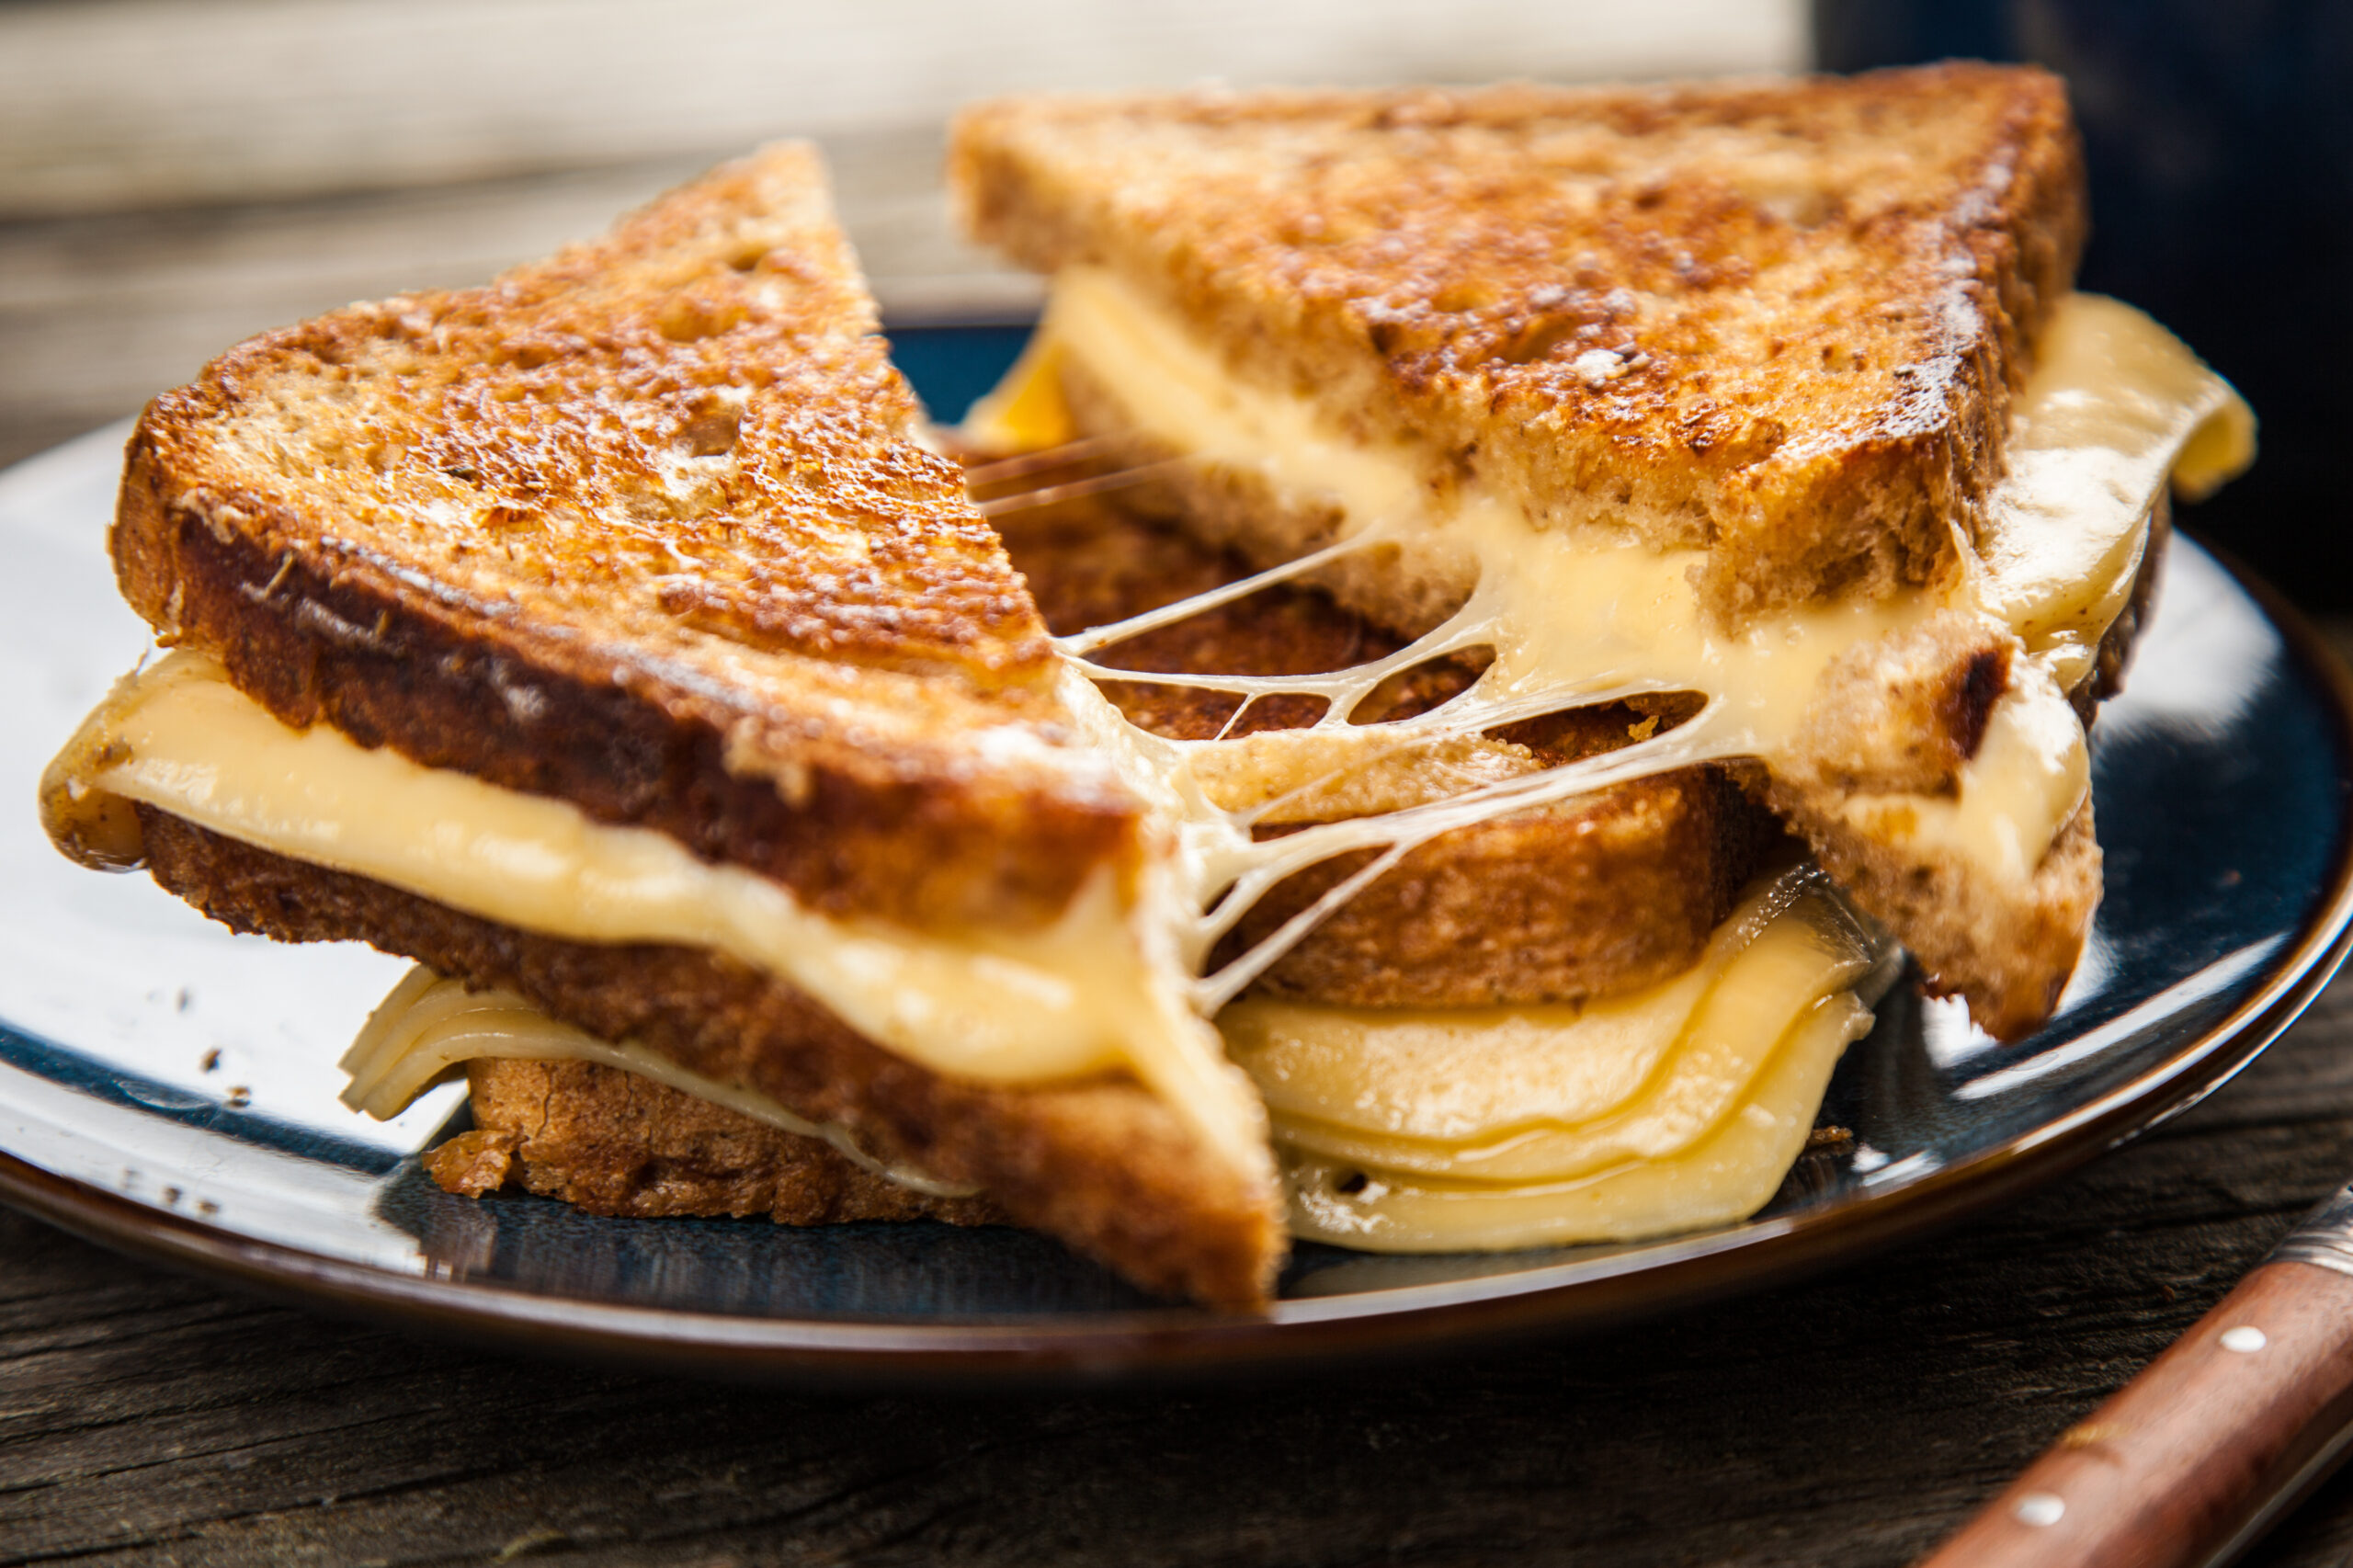 Two grilled cheese sandwiches sit on a dark plate, the top one is sliced, demonstrating a delicious cheese-pull.